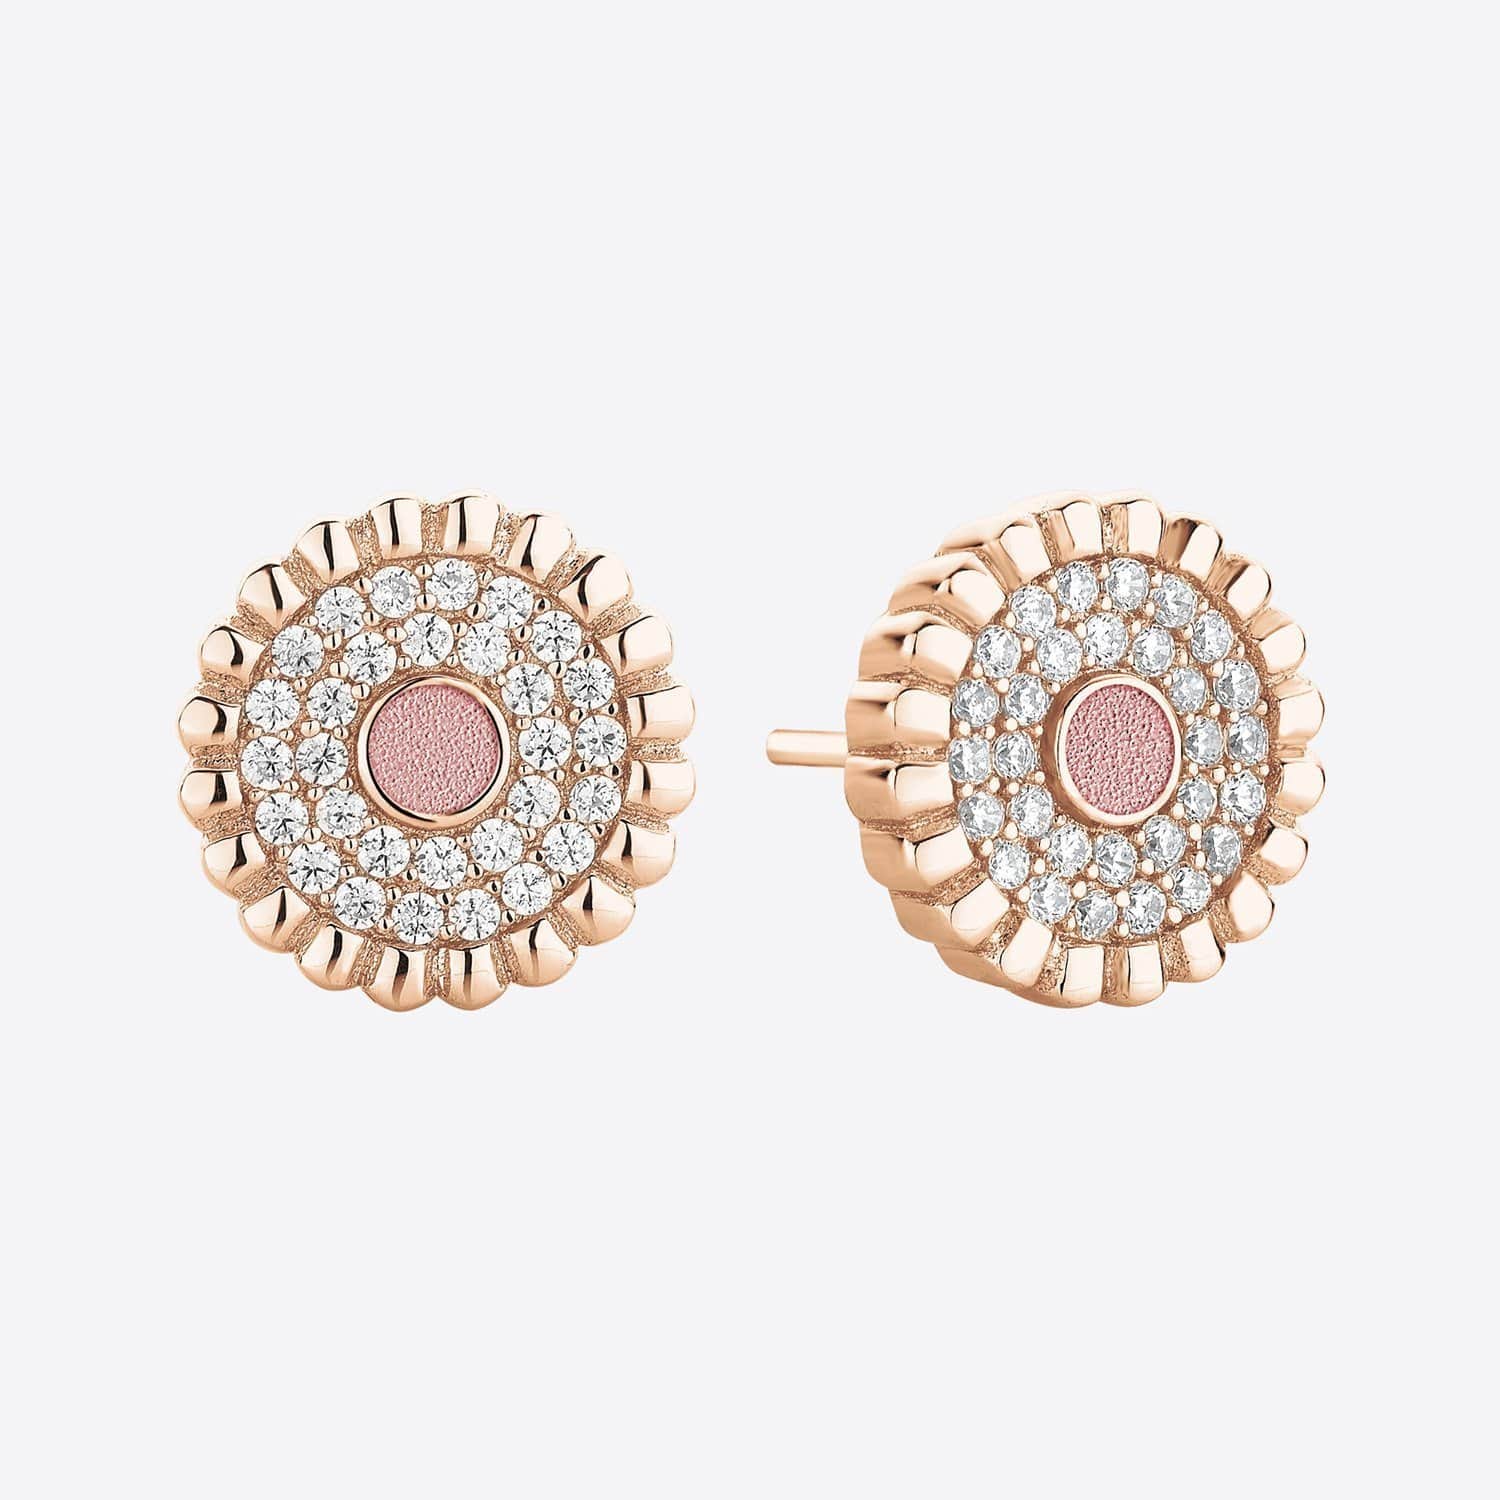 ZEADES SER02001 Bourgeon 925 Silver Rose Gold Plated Earrings - SER02001